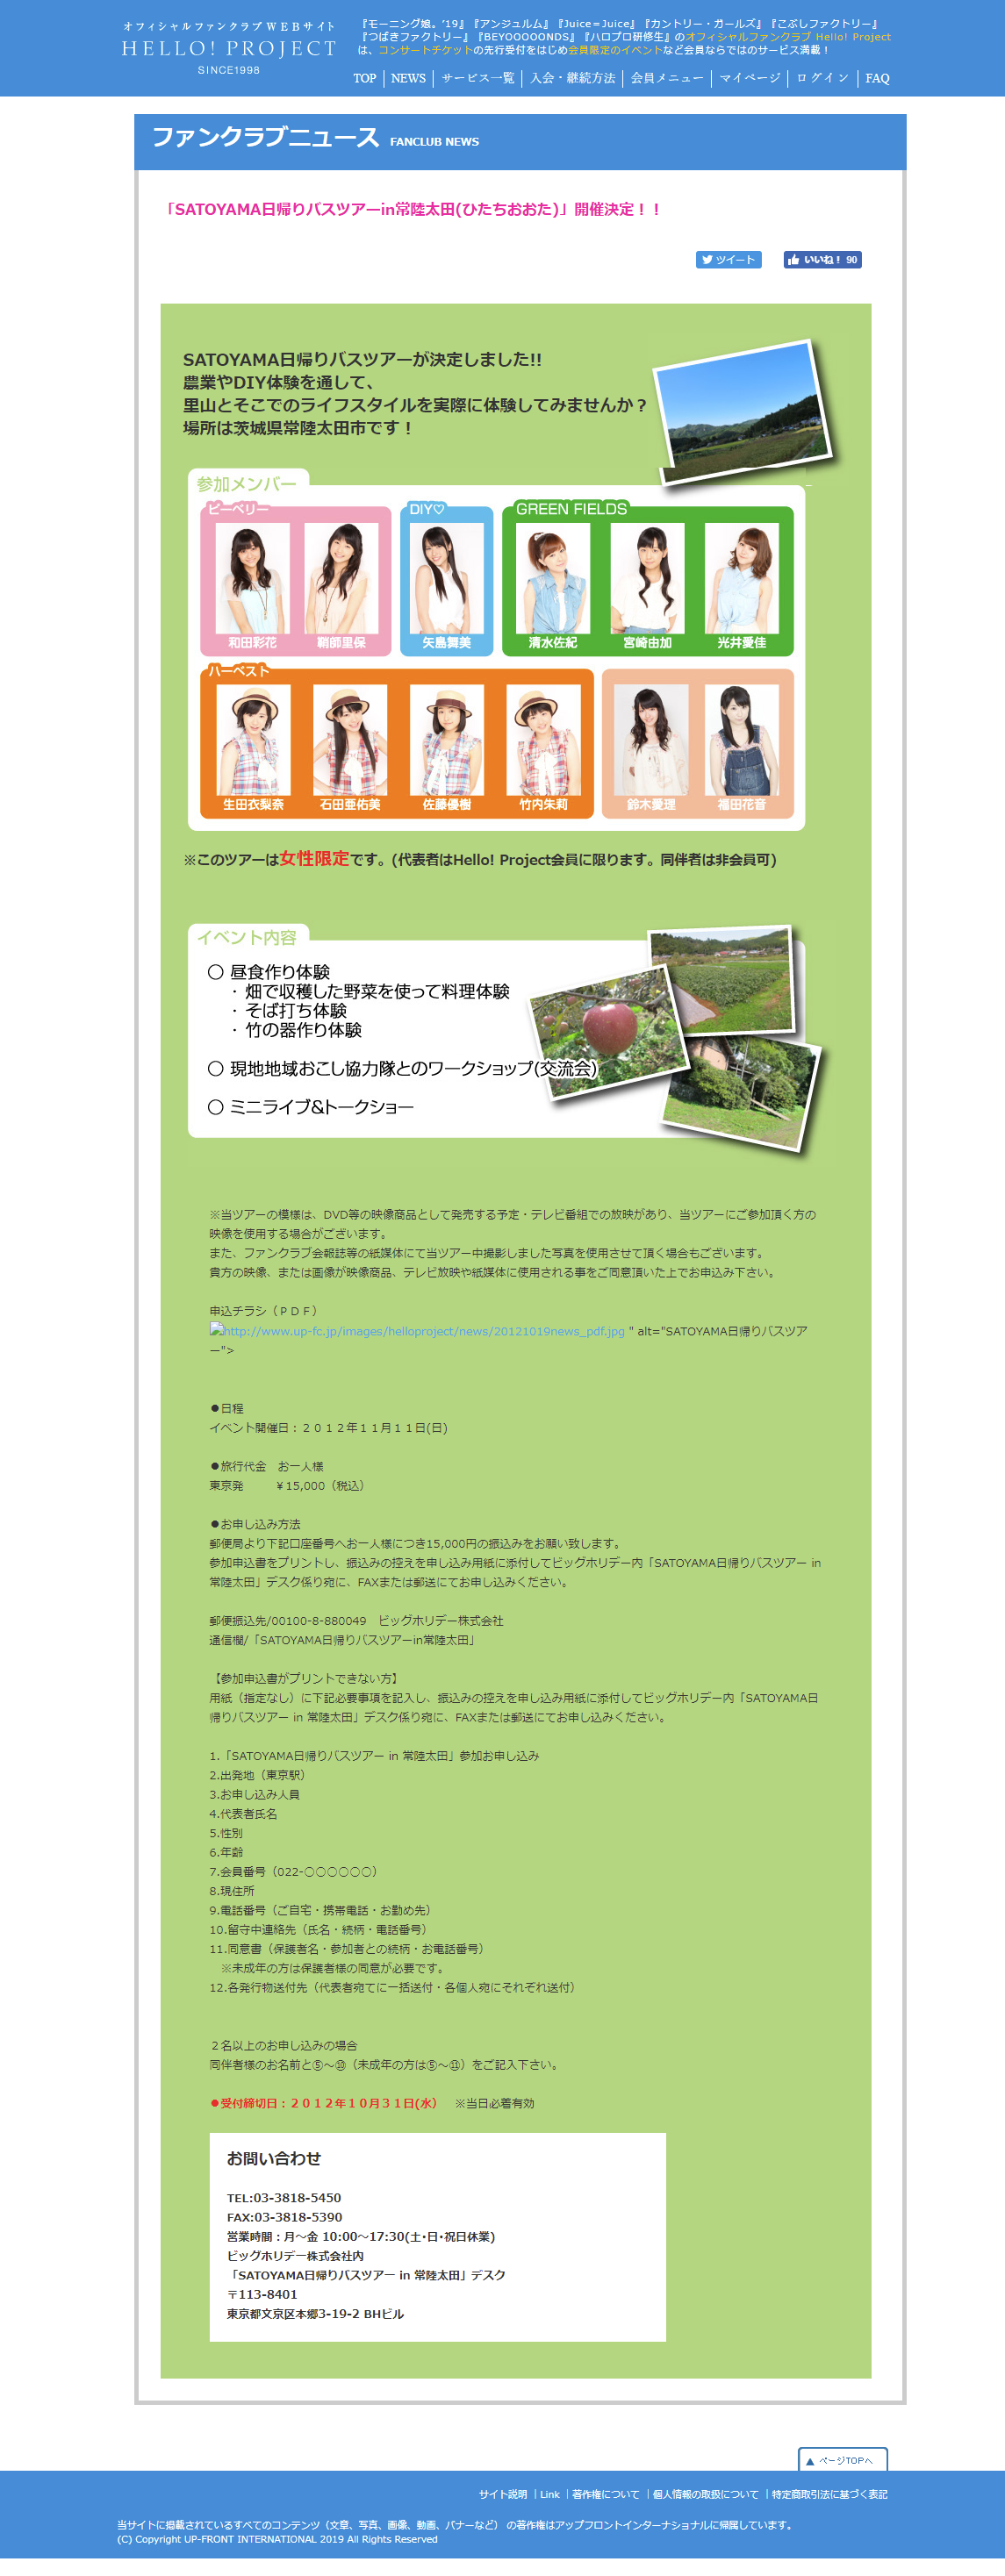 http://www.mybitchisajunky.com/whg/picture/screencapture-up-fc-jp-helloproject-news-Info-php-2019-10-23-06_52_23.png